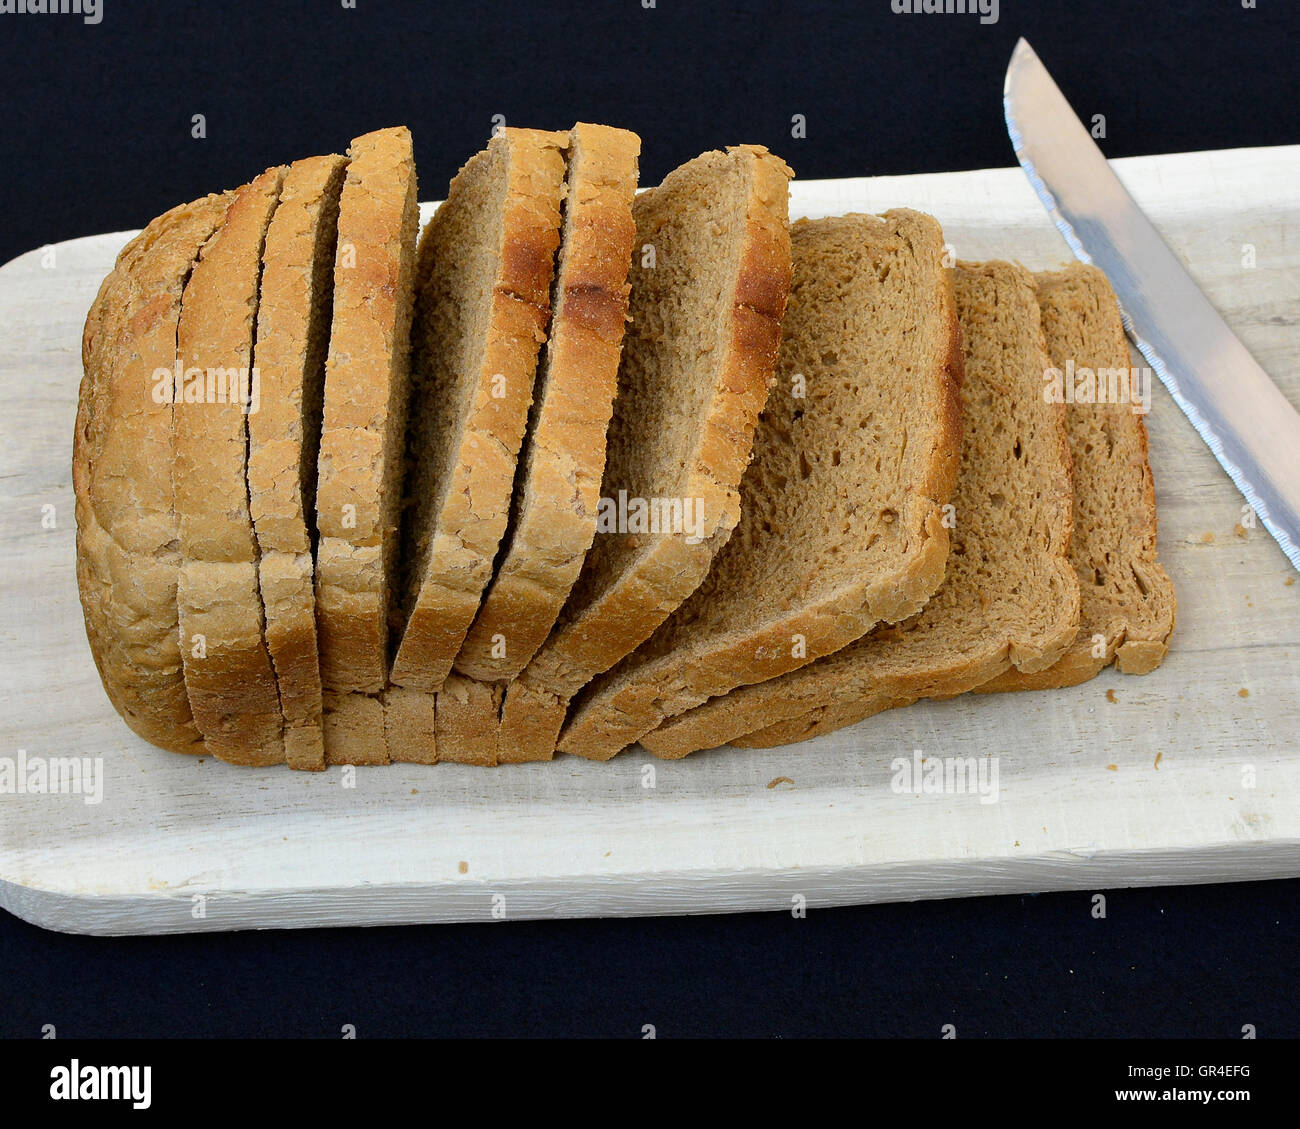 Freshly baked sliced brown rye bread on cutting board. Stock Photo